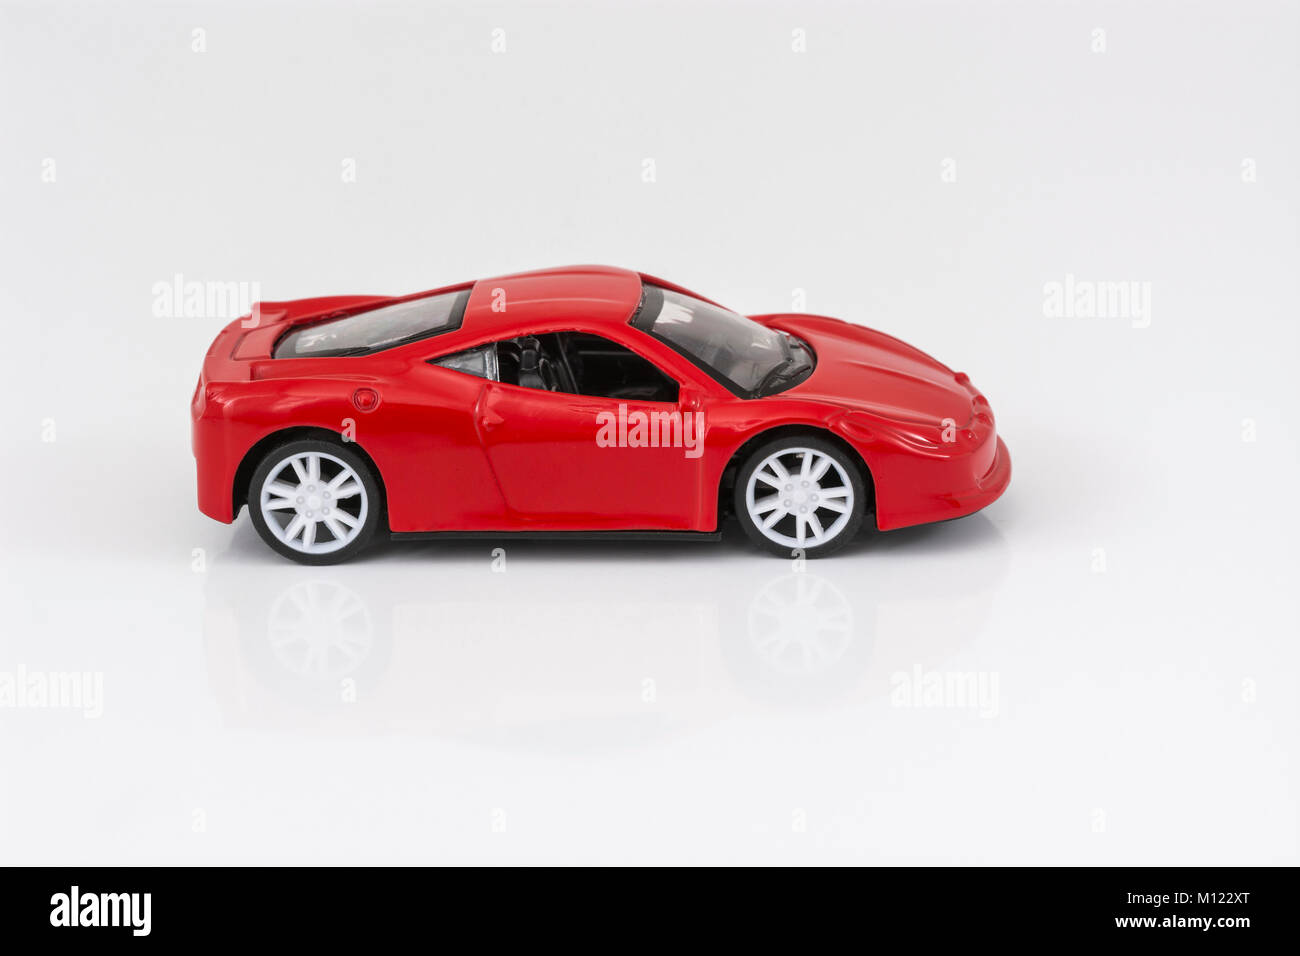 small red toy car